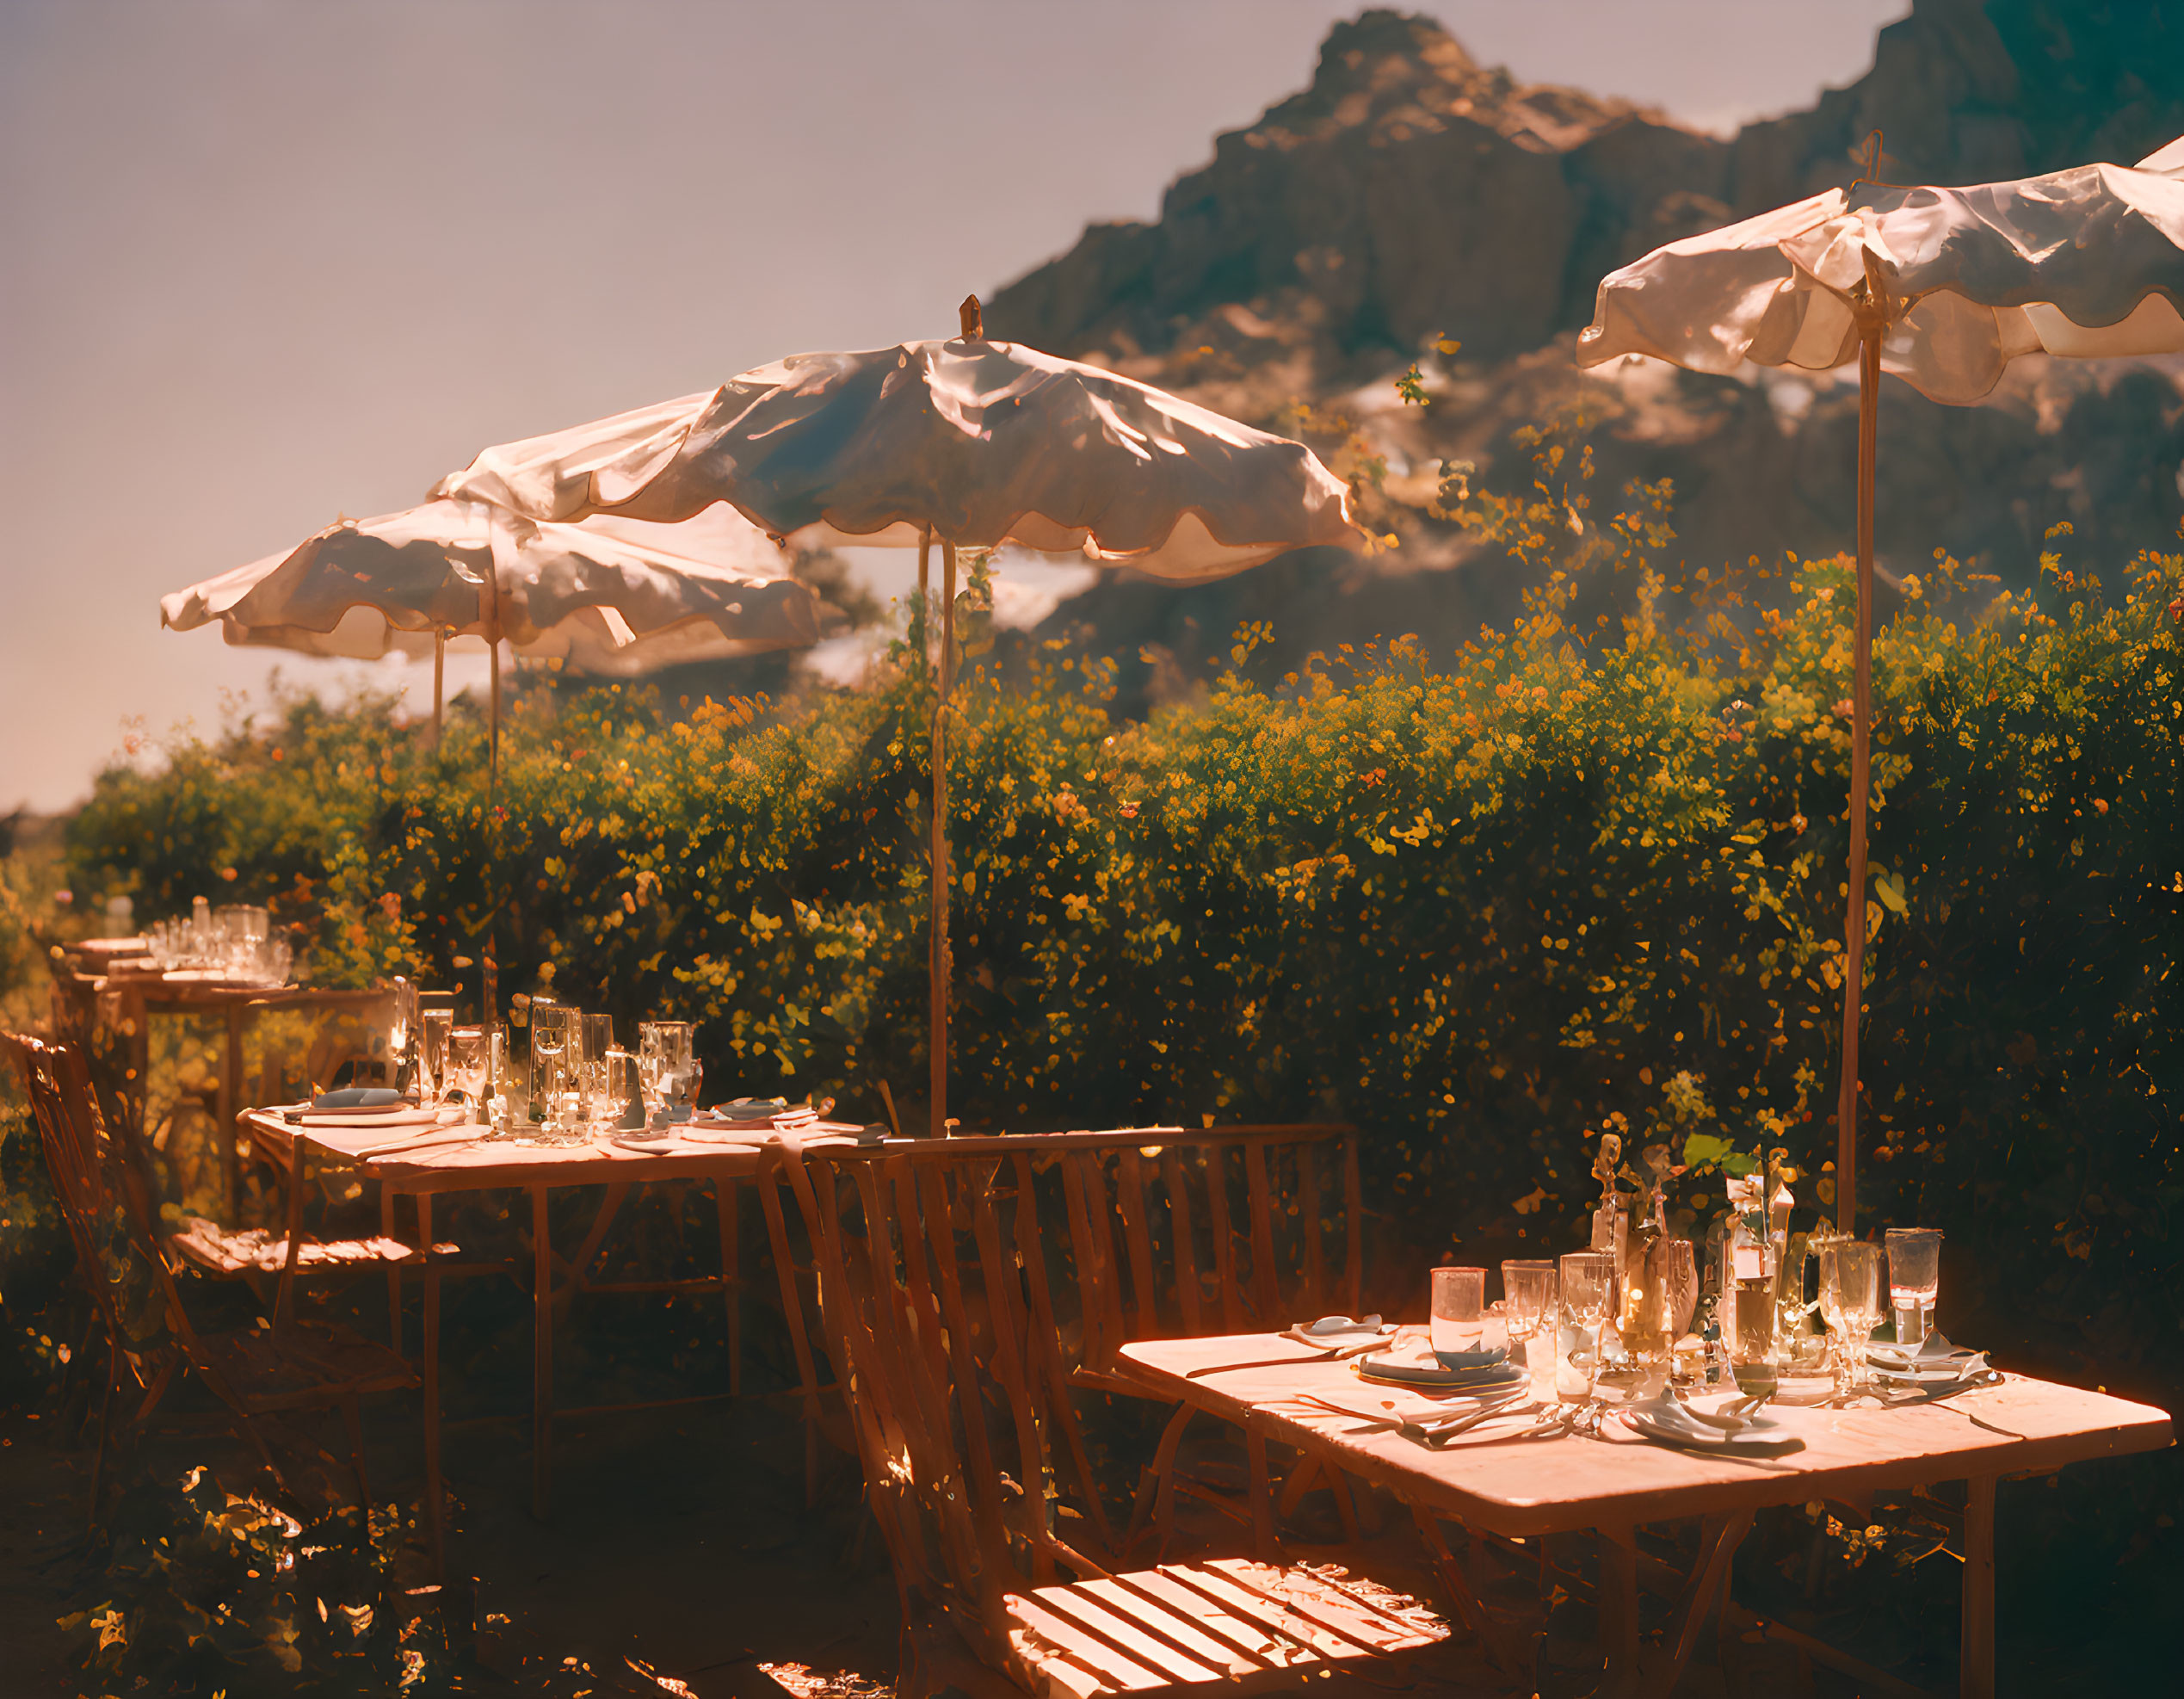 Wooden tables, glasses, and white umbrellas in outdoor dining setup surrounded by lush greenery and